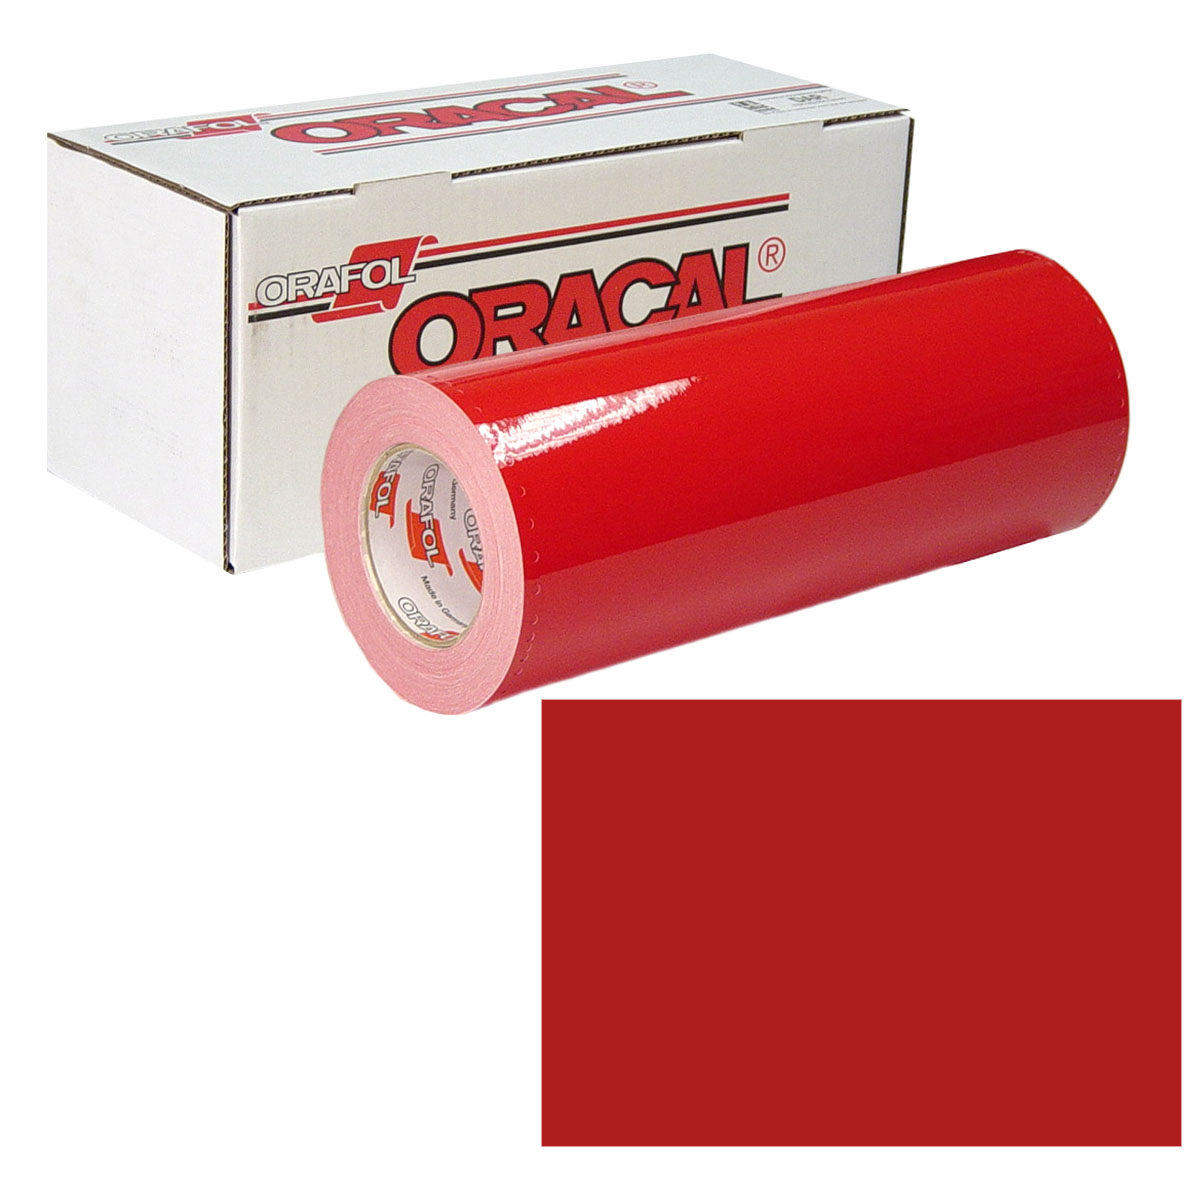 ORACAL 951 15in X 50yd 031 Red